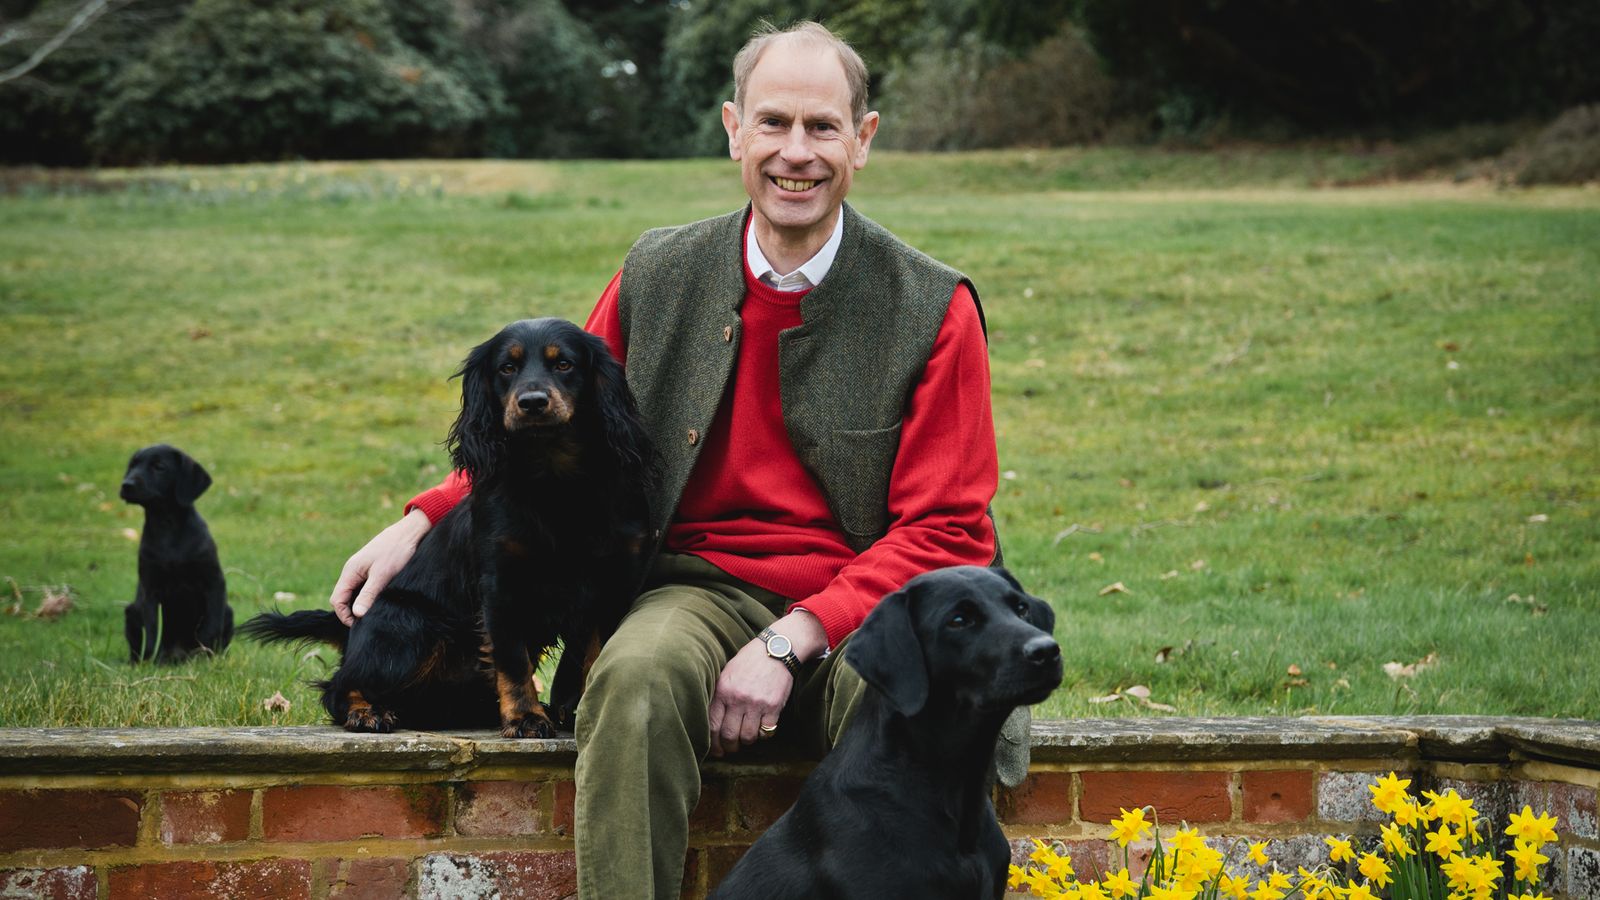 Prince Edward, Duke of Edinburgh, Celebrates 60th Birthday with New Images and Appointments